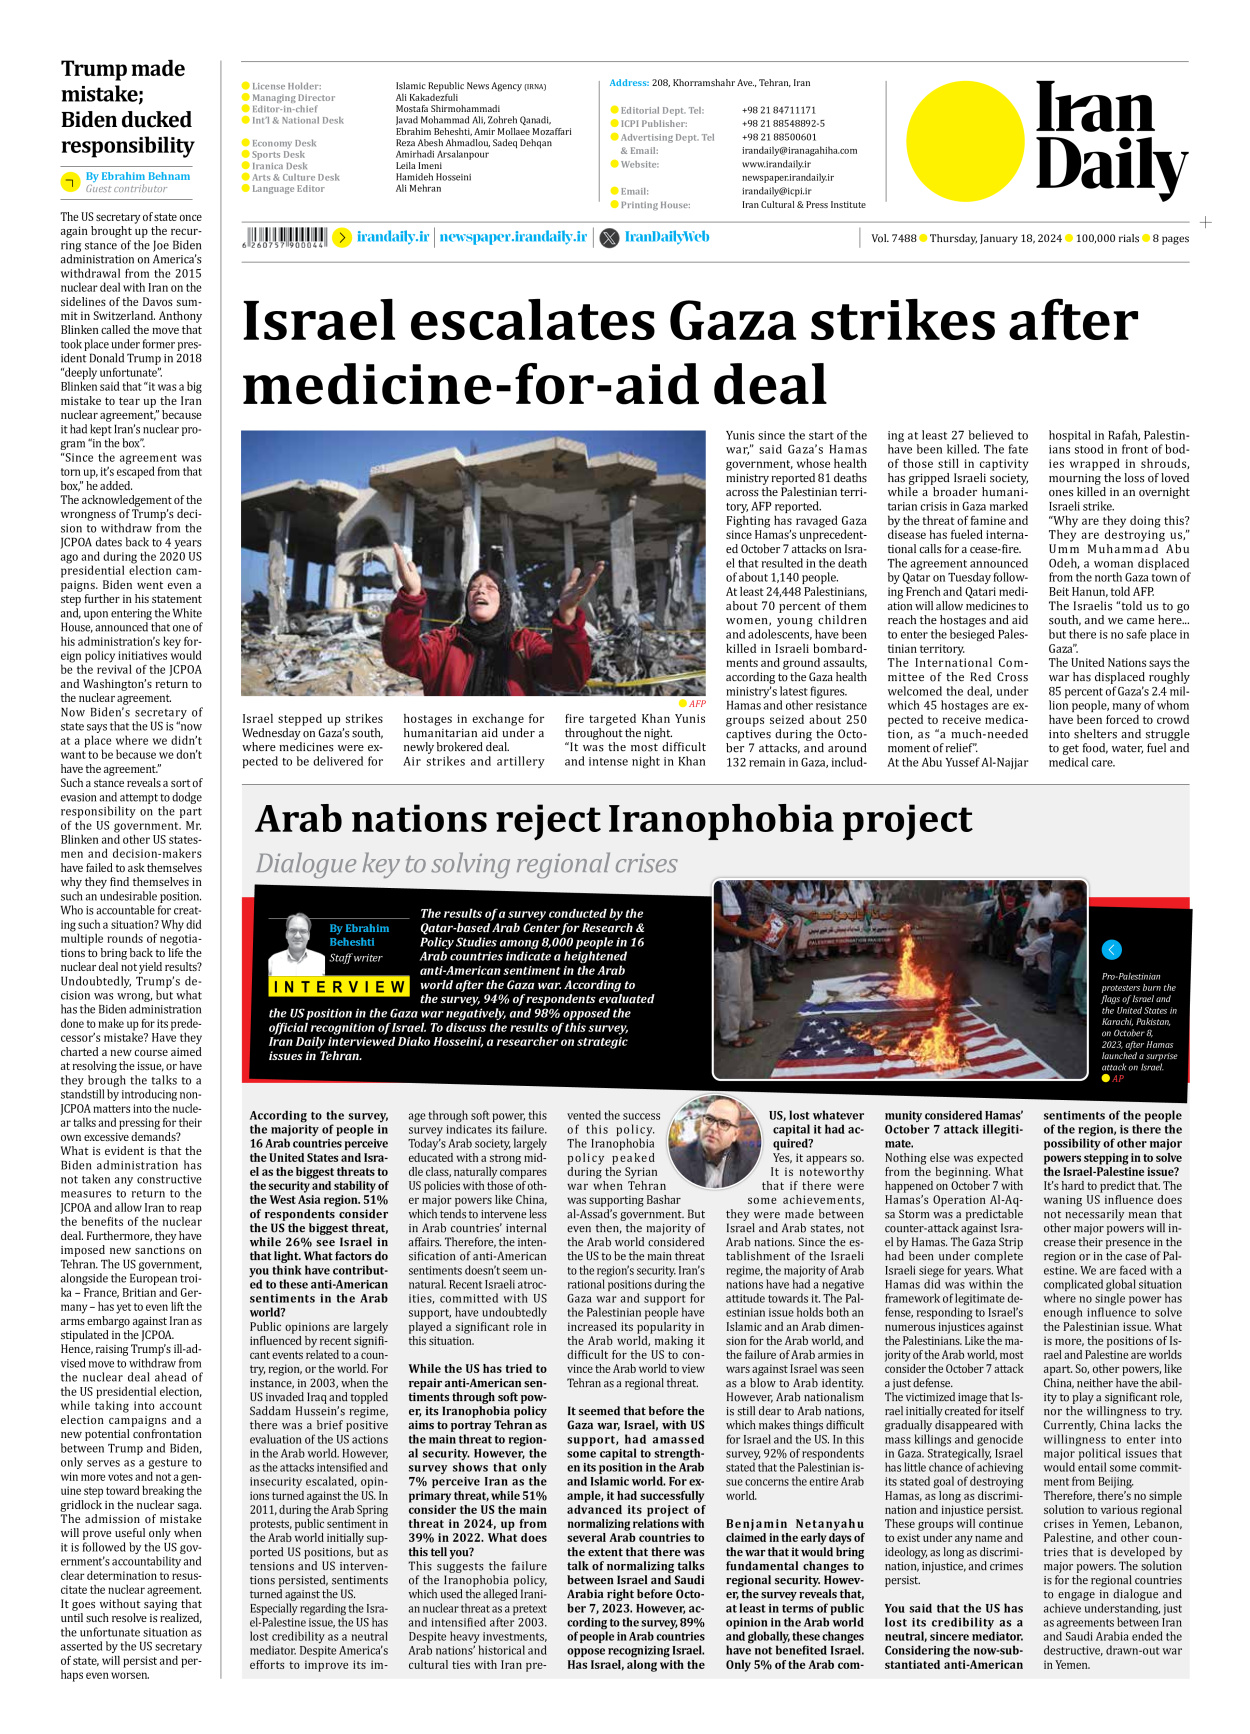 Iran Daily - Number Seven Thousand Four Hundred and Eighty Eight - 18 January 2024 - Page 8